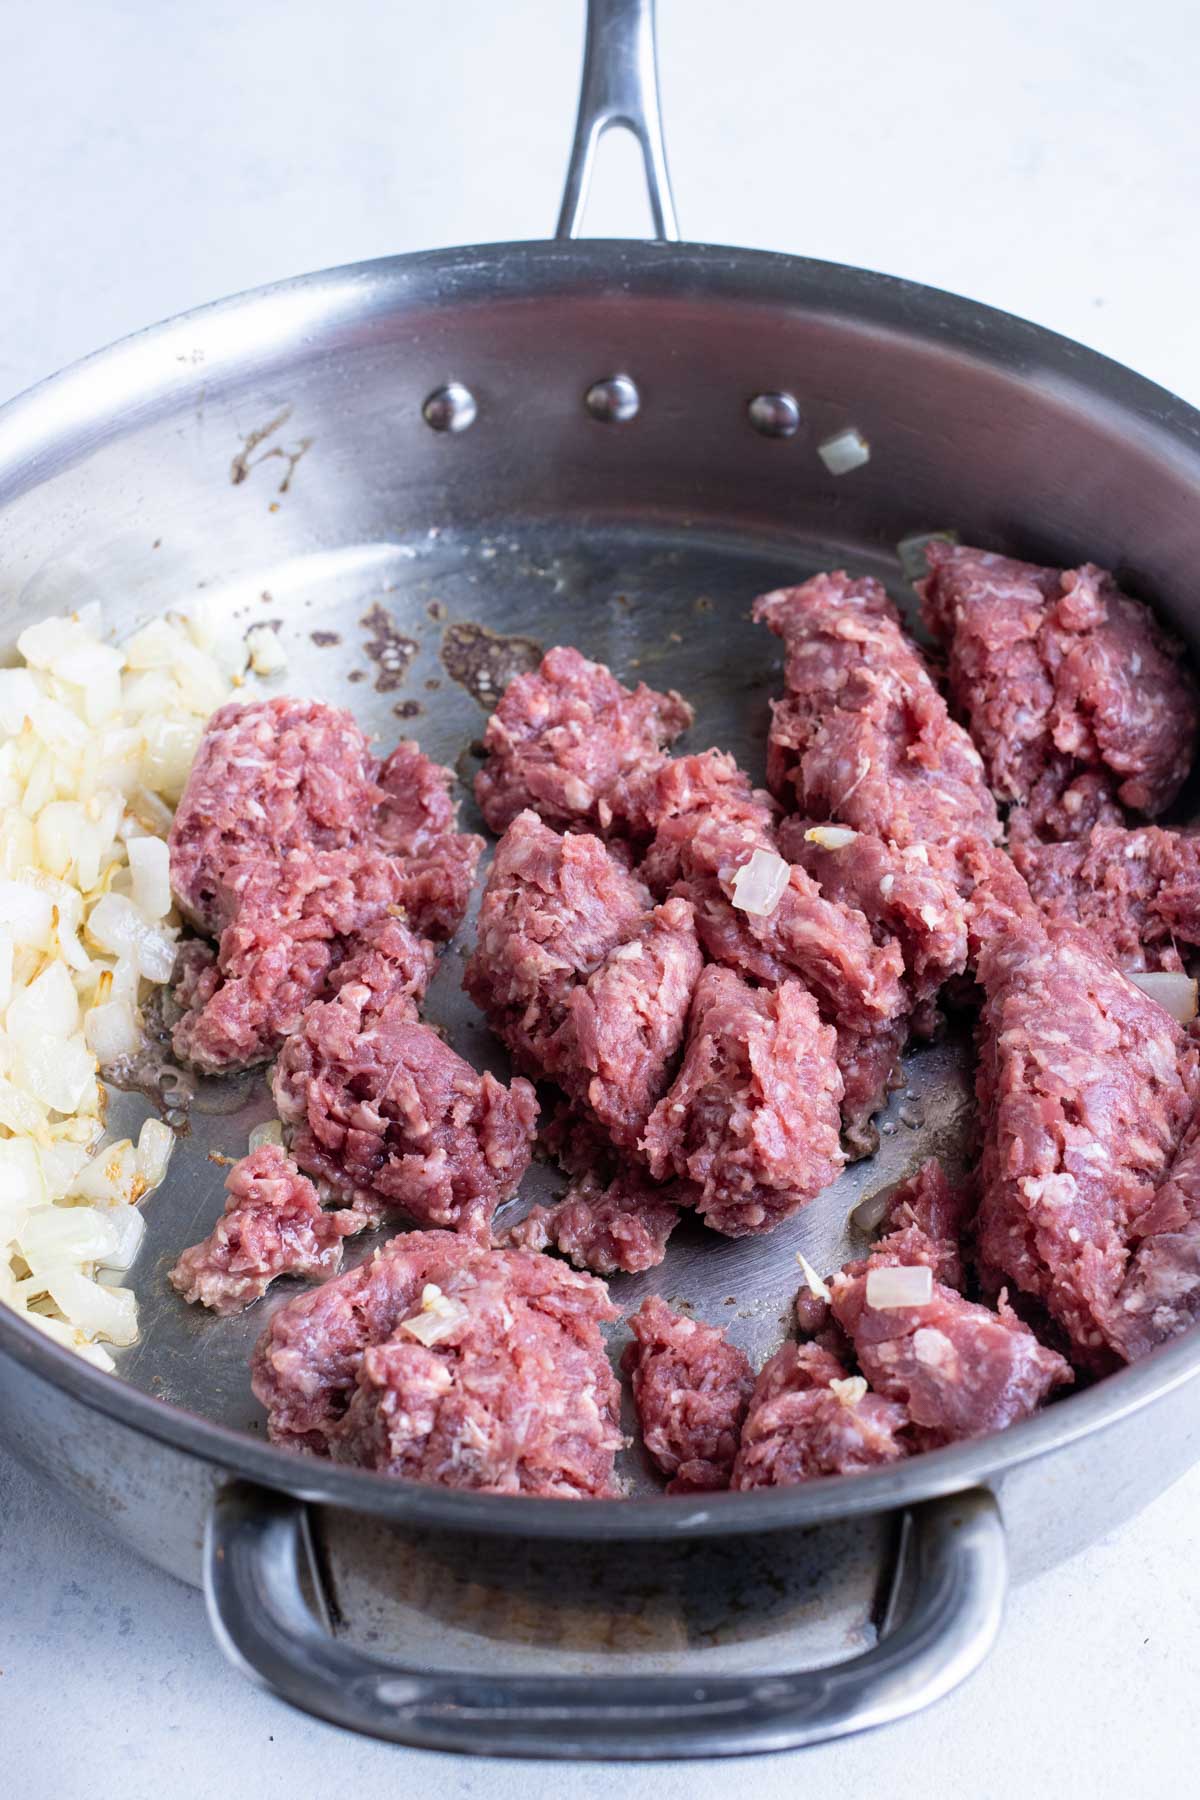 Ground meat is added to a skillet with onions and garlic.